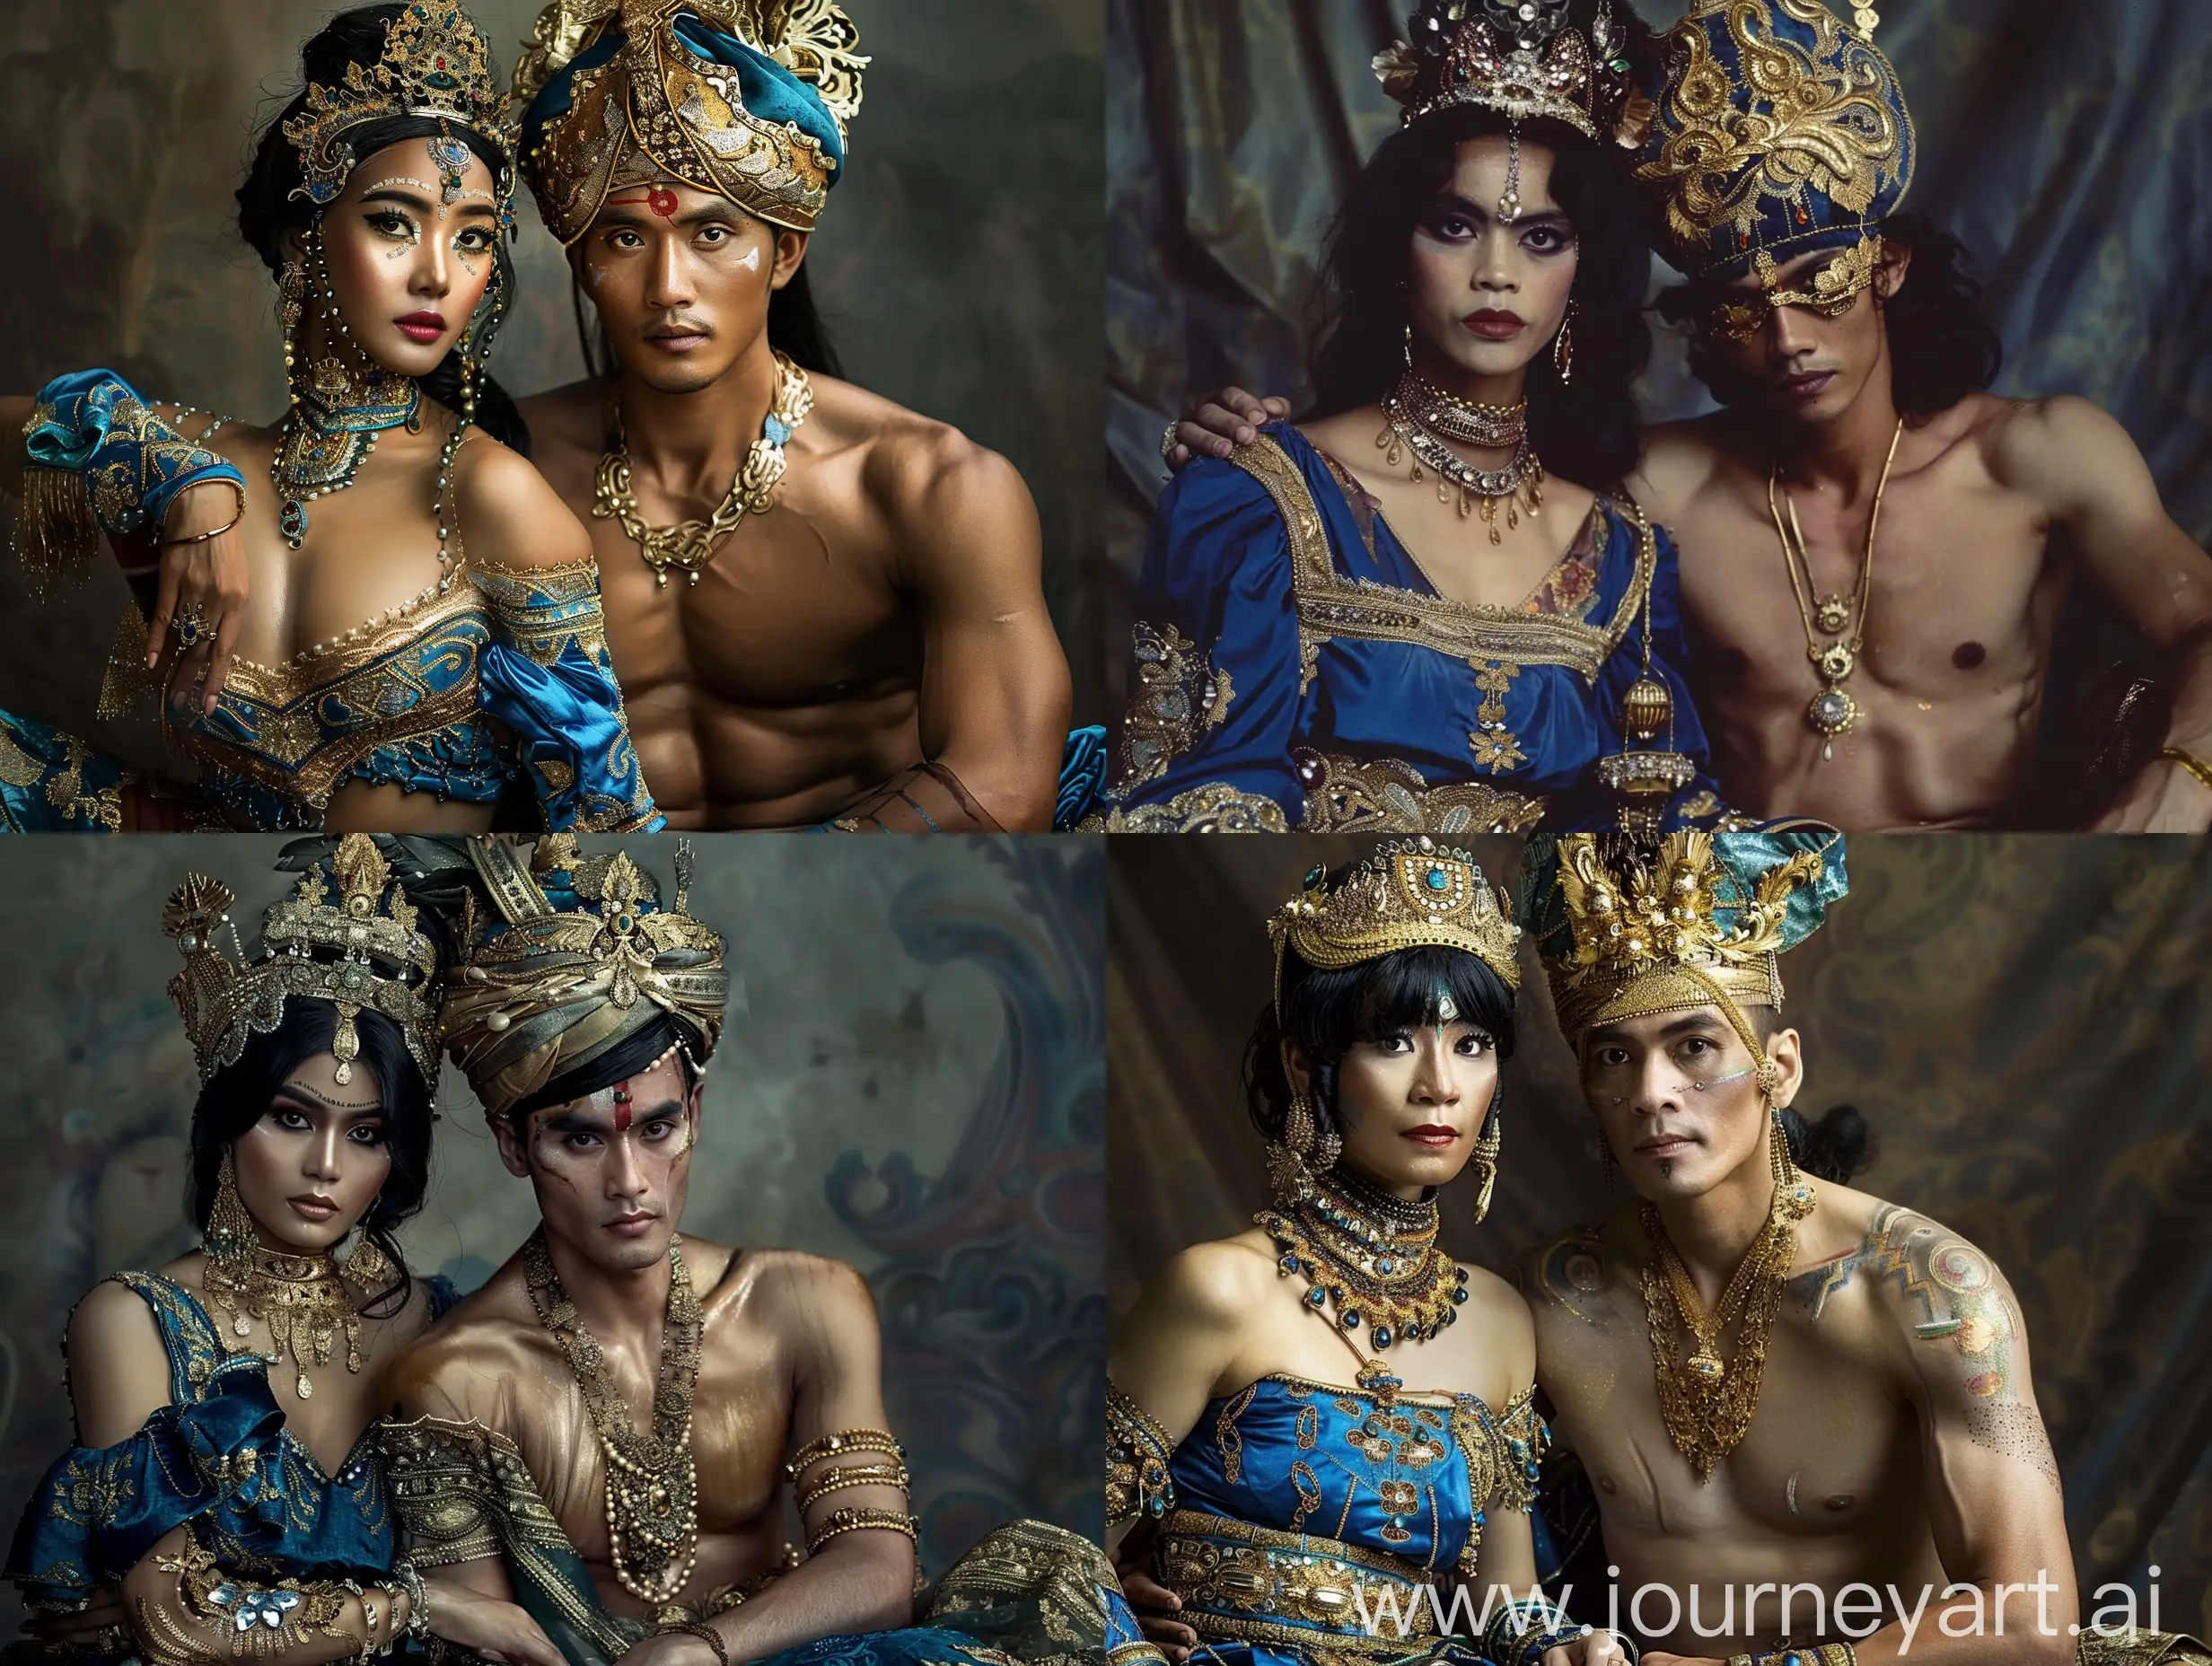 An Indonesian royal man and woman, in ornate costumes sitting together. The woman had black hair and wore a blue dress with gold accents and a crown. The man is shirtless and has a headdress with gold details. They both had elaborate jewelry and makeup.